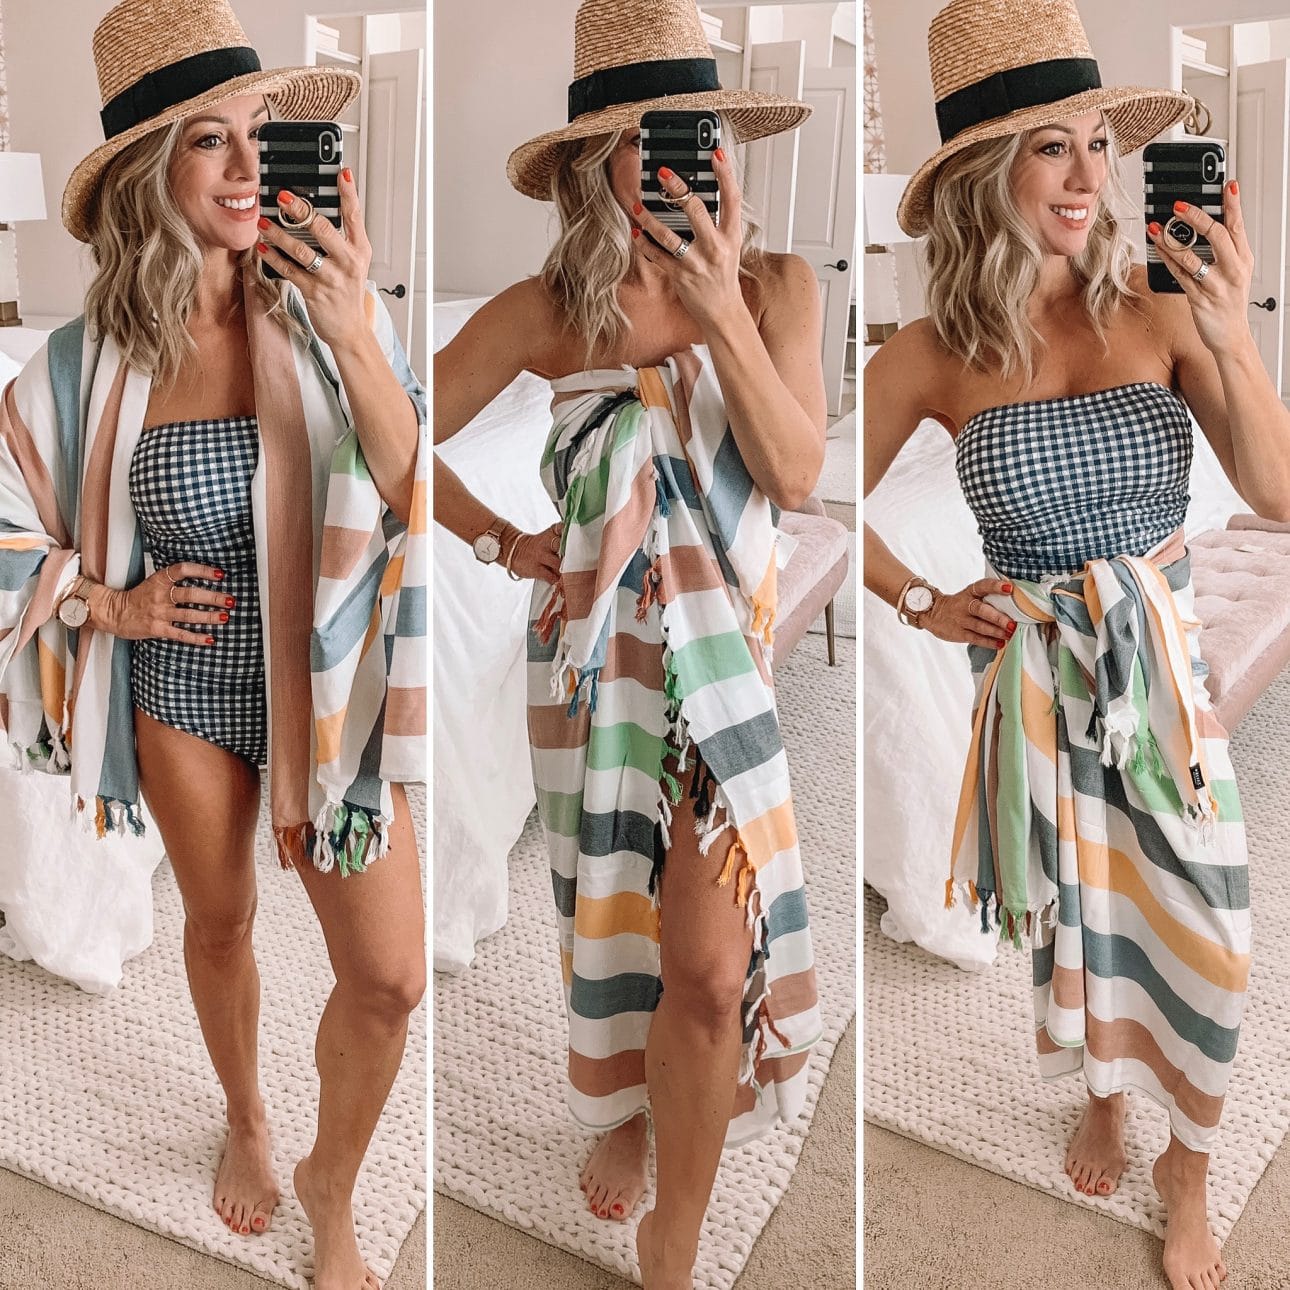 Gingham one-piece swimsuit with stripe sarong